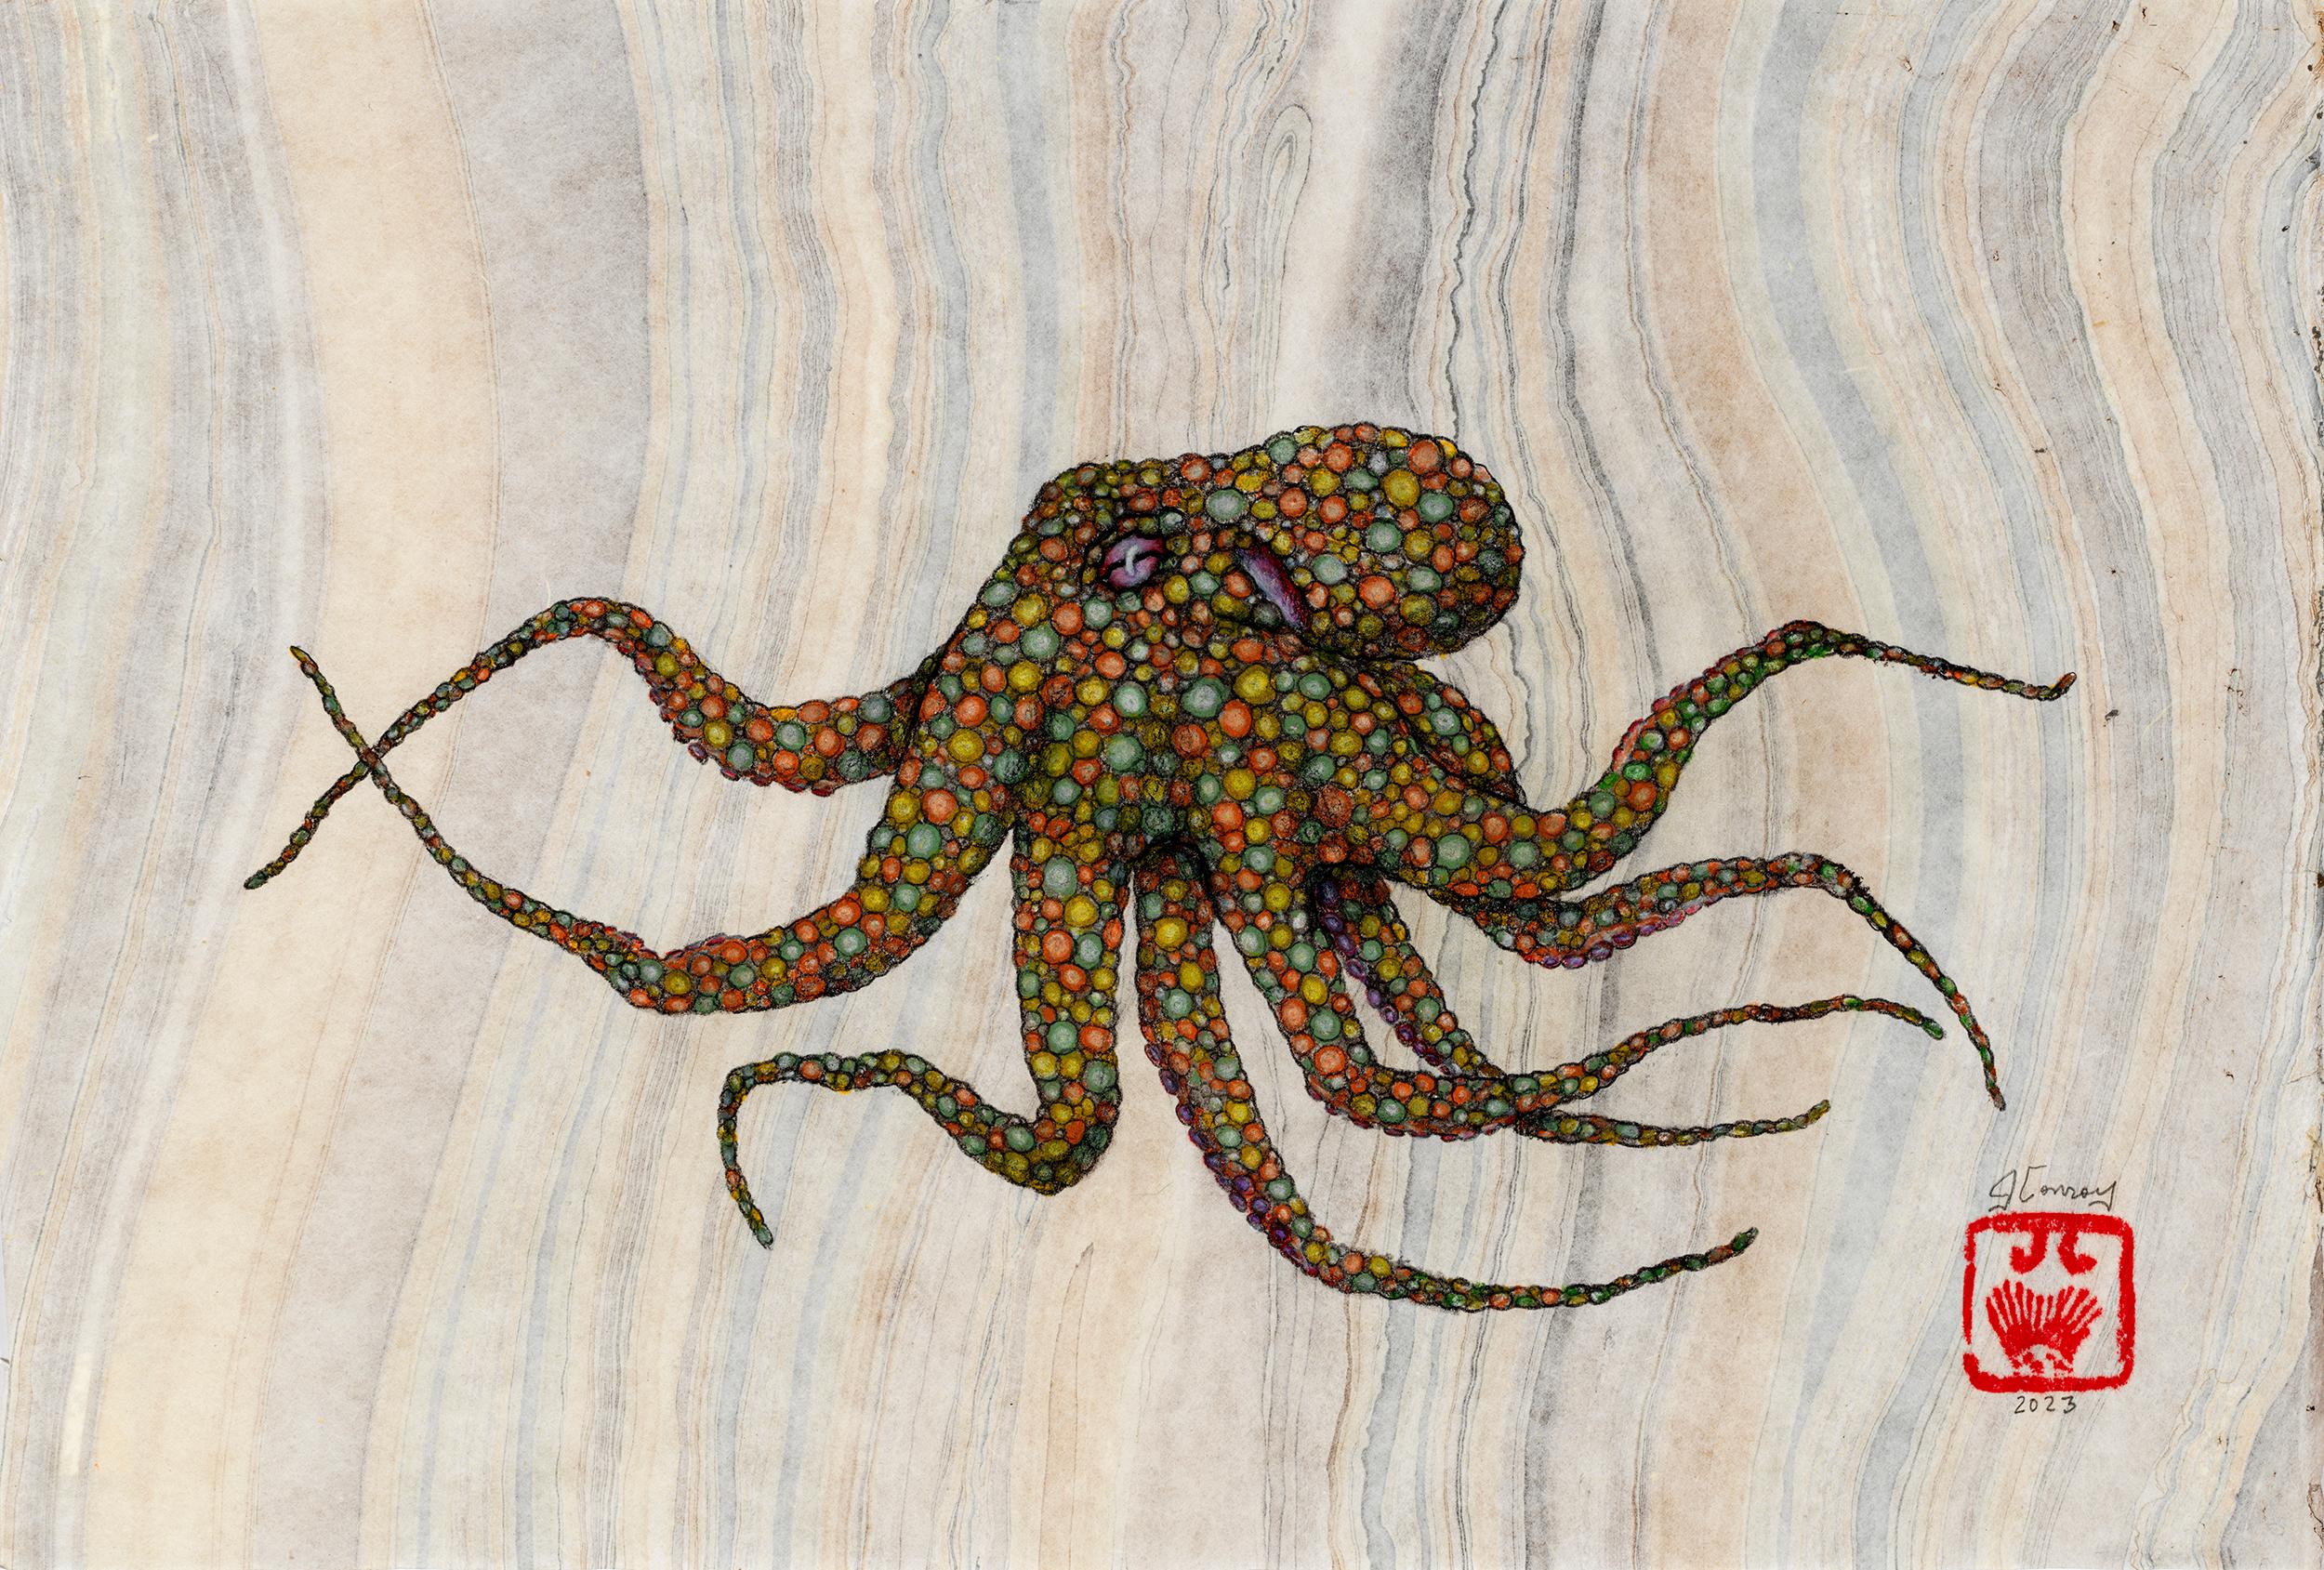 Jeff Conroy Animal Painting - 70's Kitchen - Gyotaku Style Sumi Ink Painting of an Octopus on Mulberry Paper